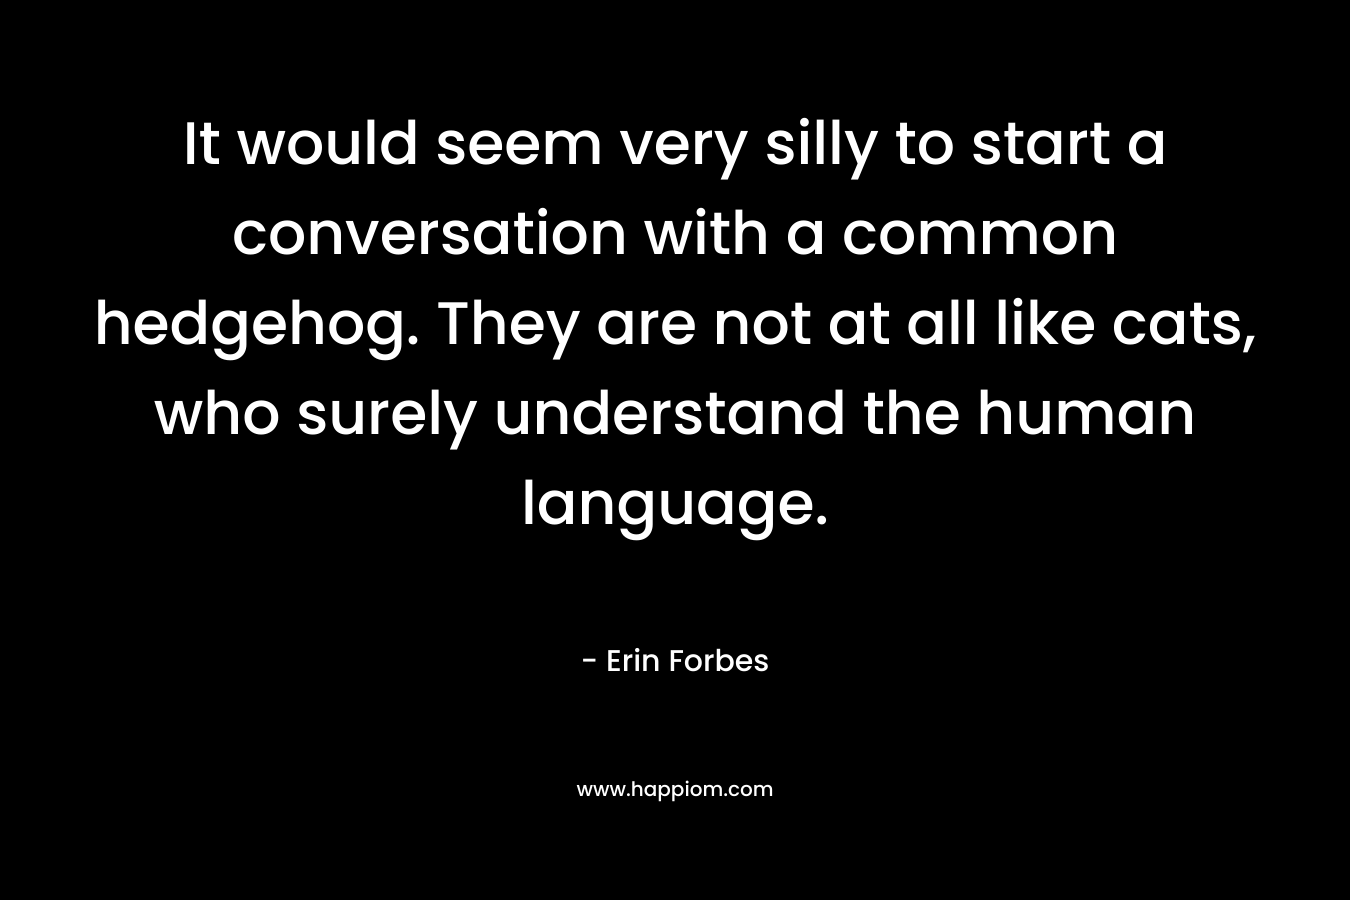 It would seem very silly to start a conversation with a common hedgehog. They are not at all like cats, who surely understand the human language.